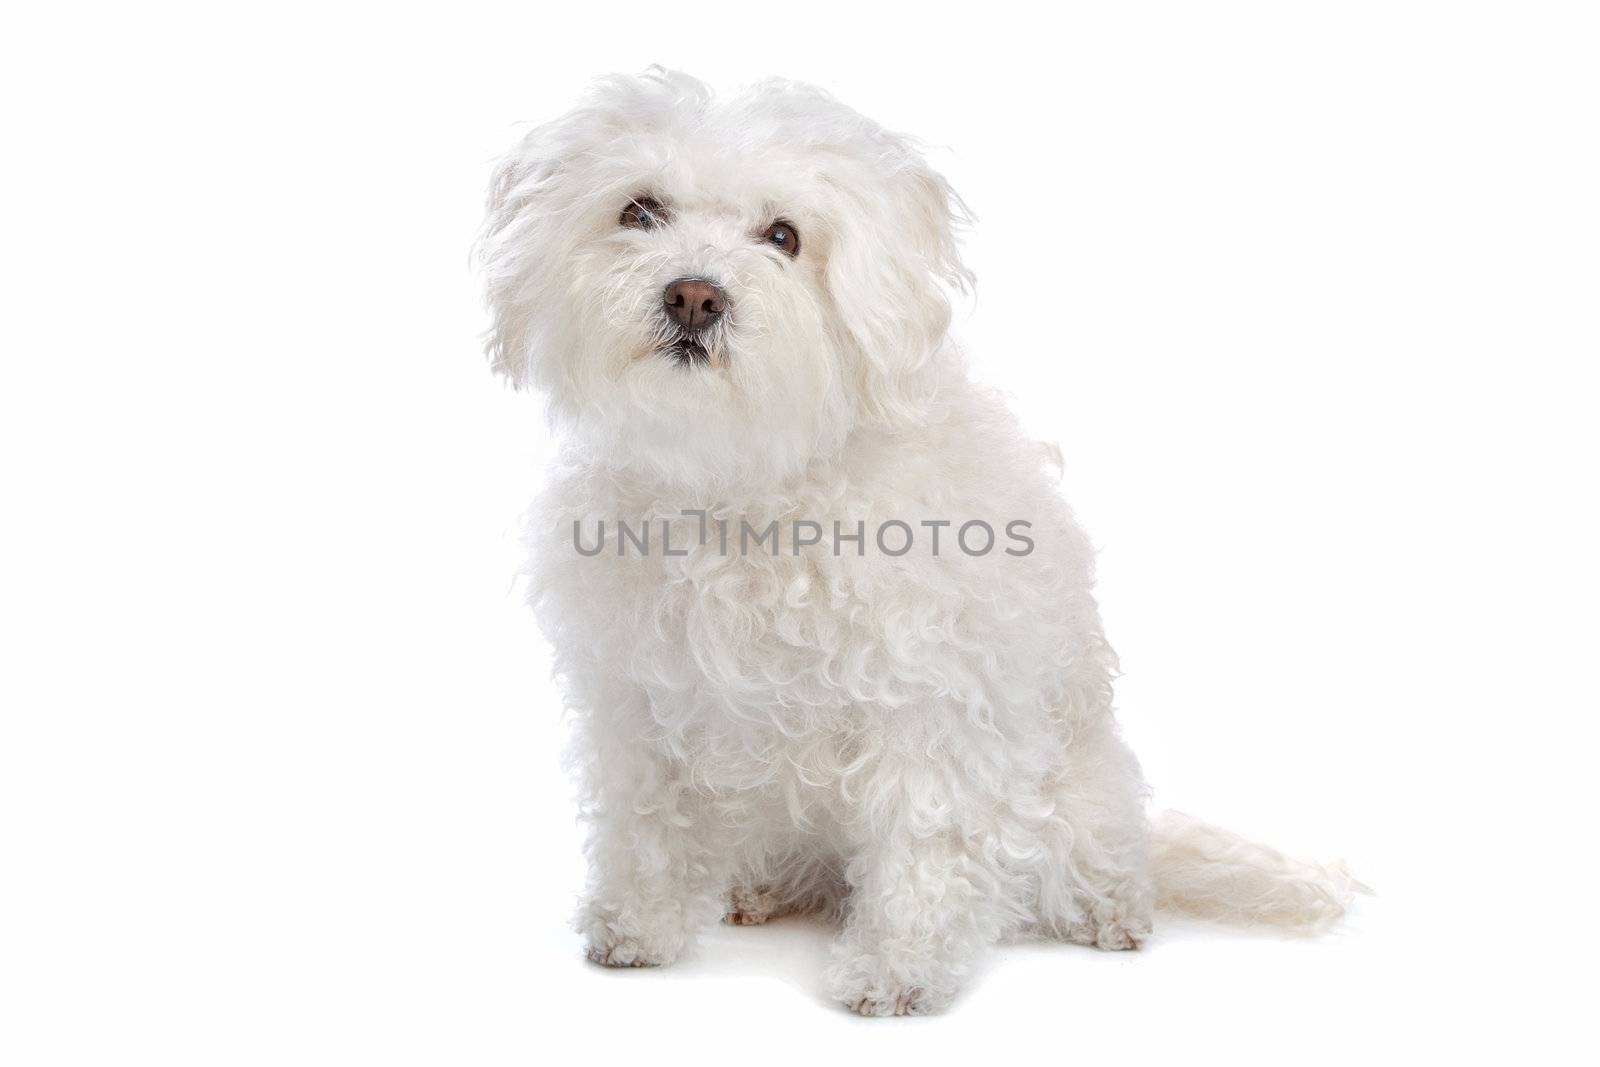 bolognezer(Bichon group) isolated on white